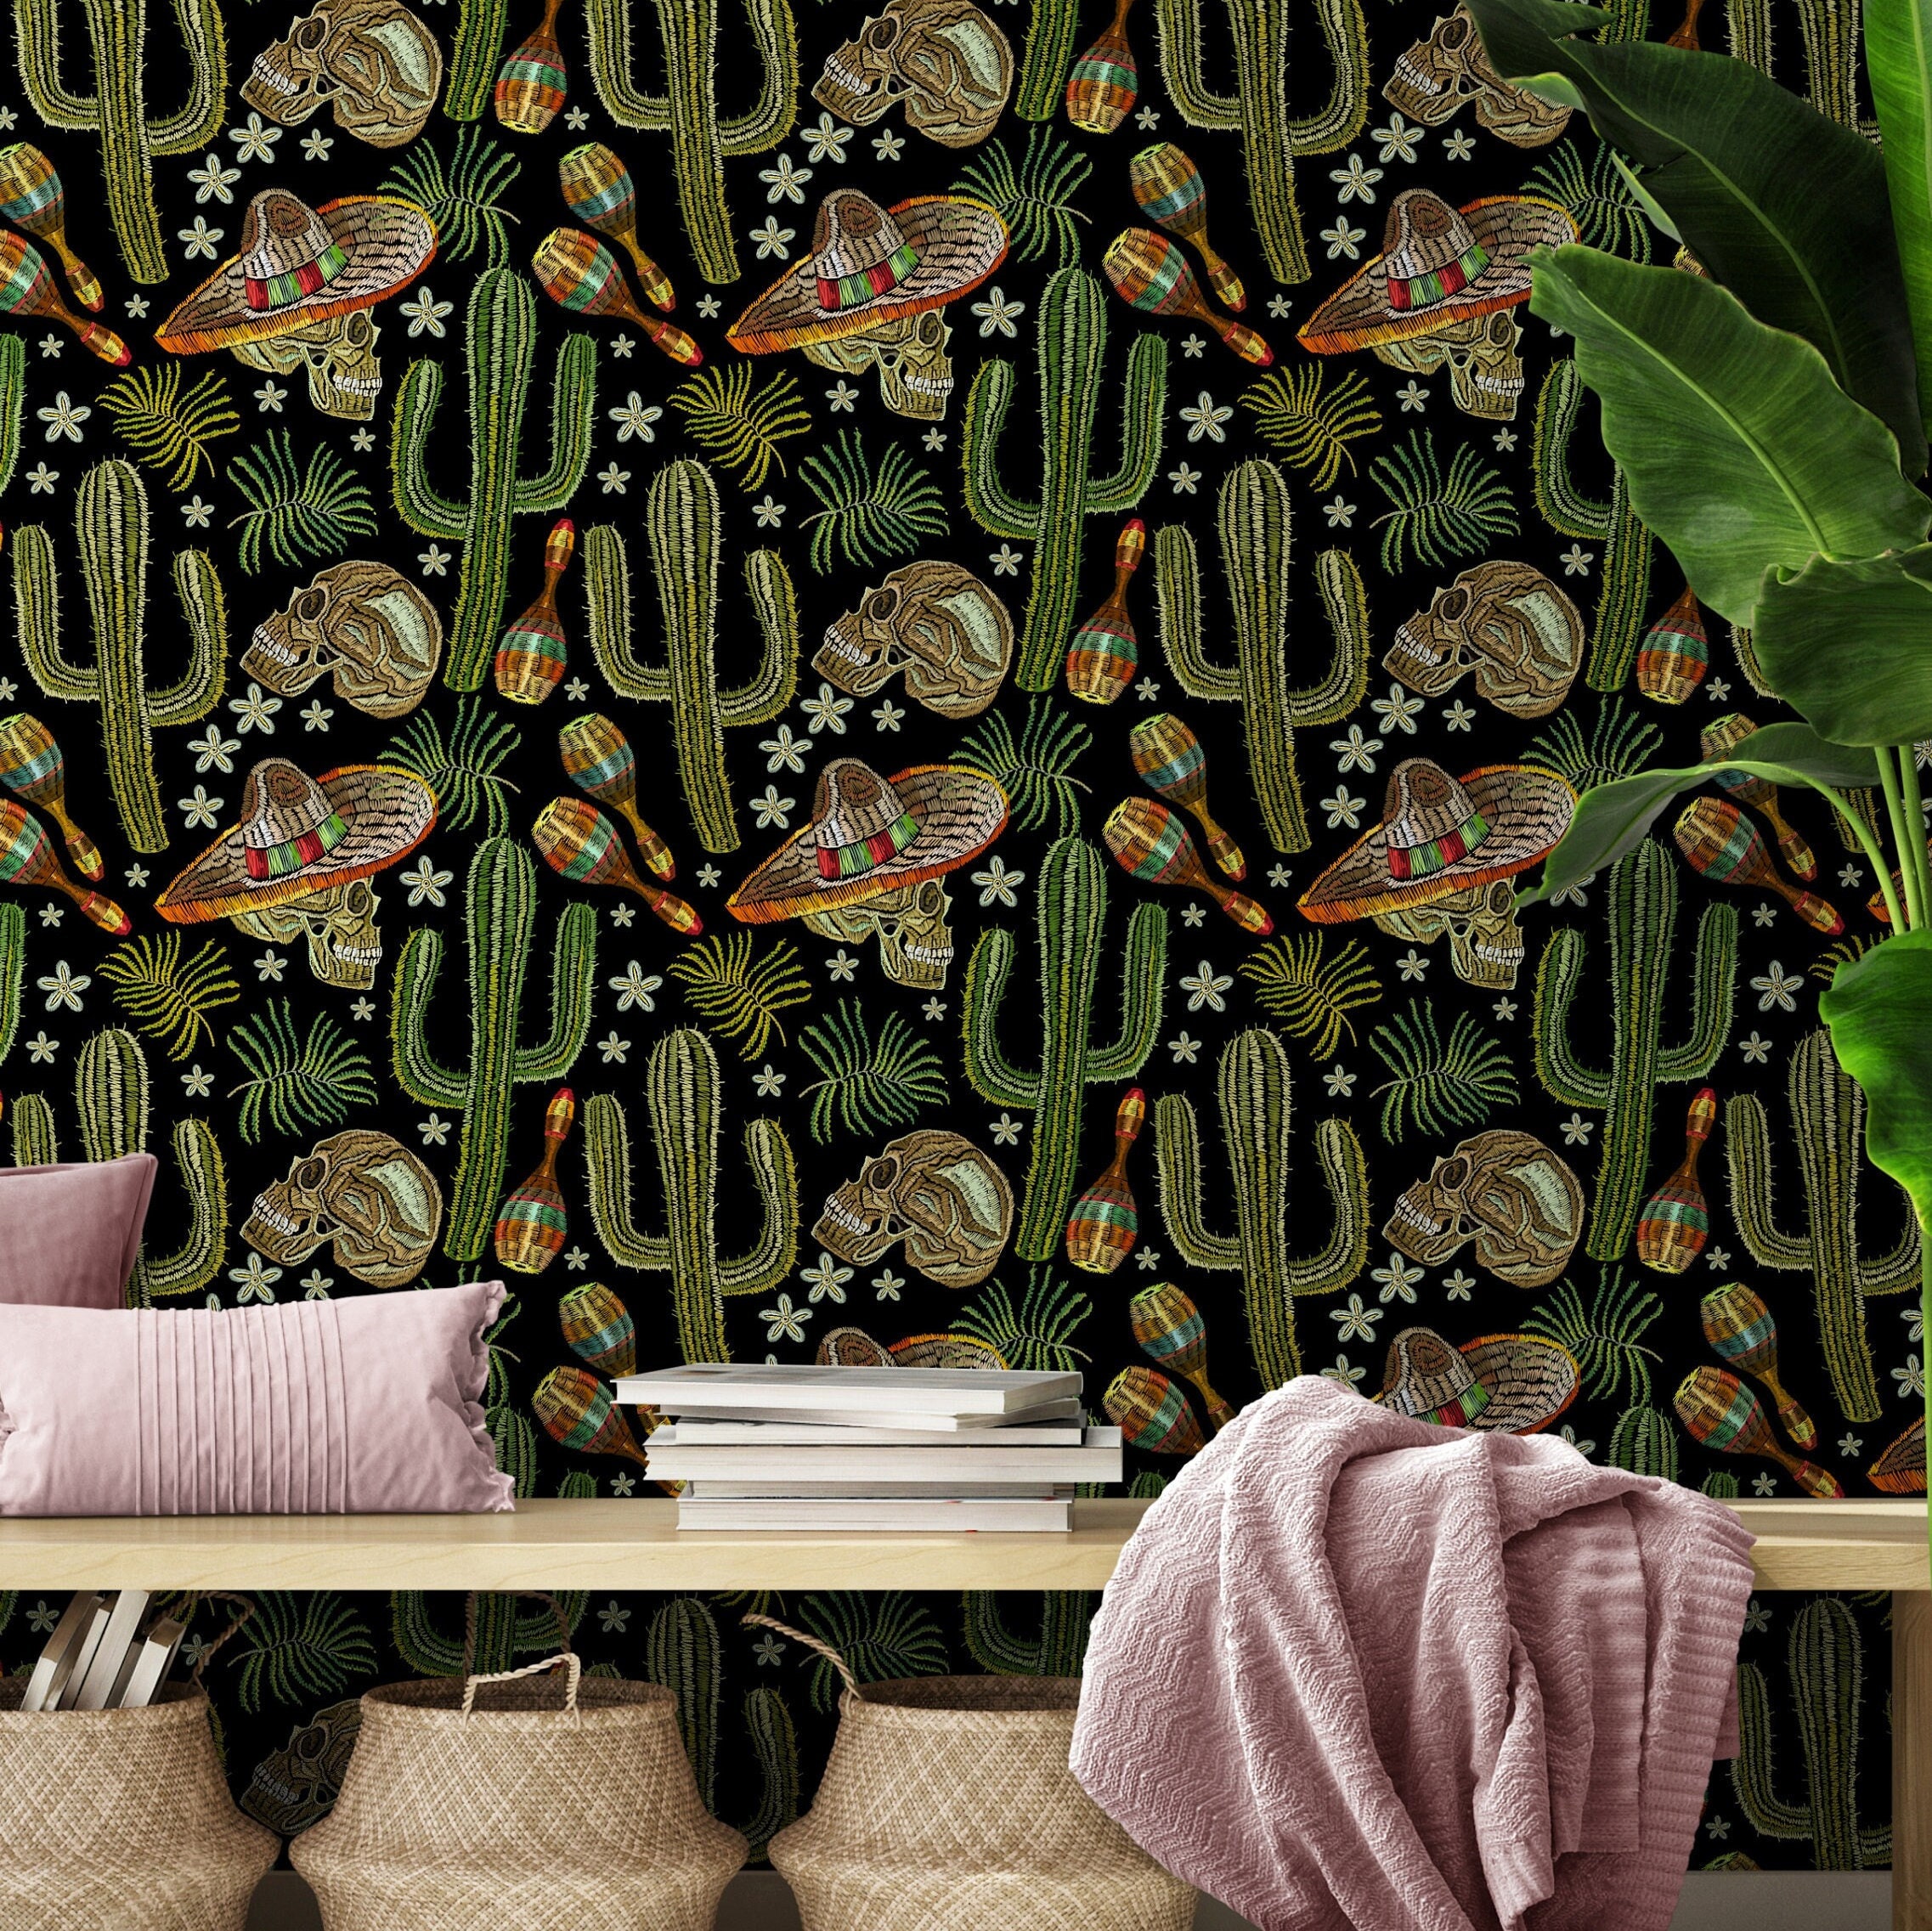 Western Peel and Stick Wallpaper Removable and SelfAdhesive